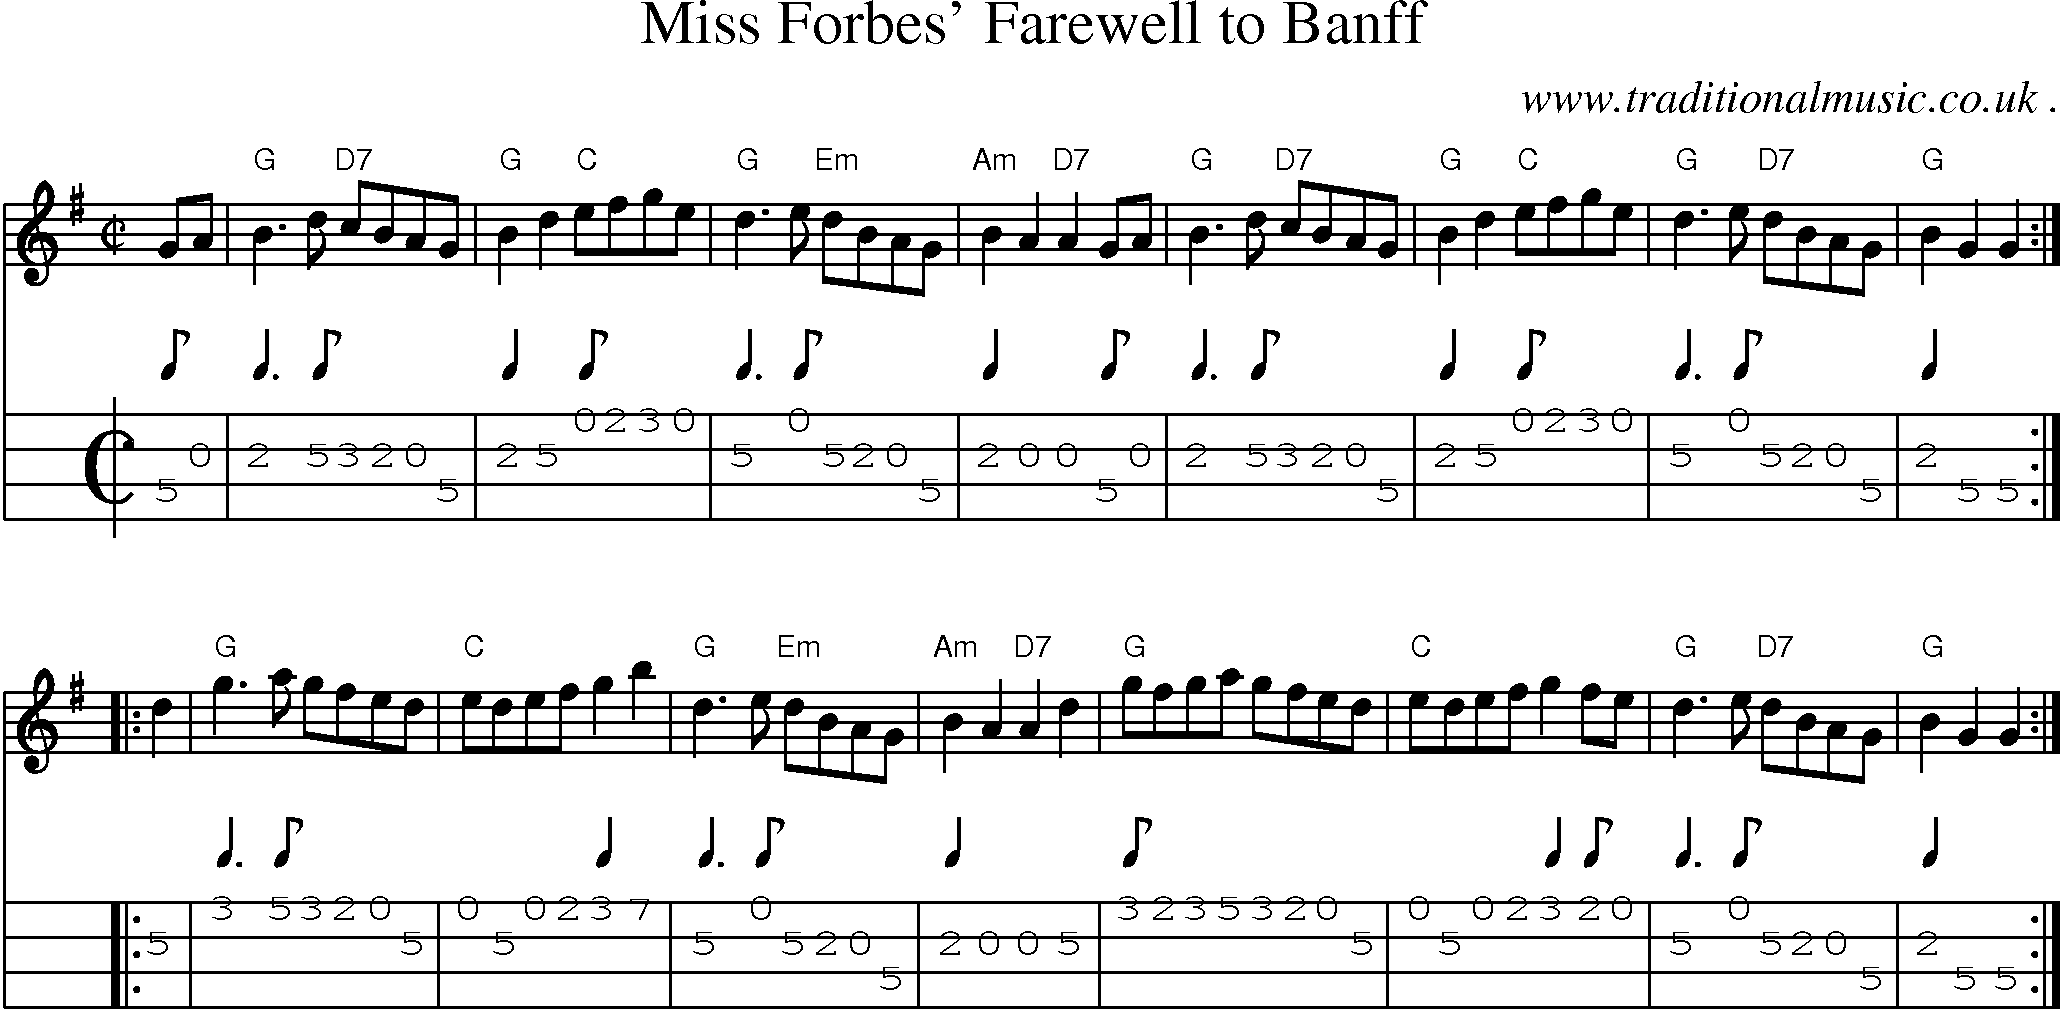 Sheet-music  score, Chords and Mandolin Tabs for Miss Forbes Farewell To Banff